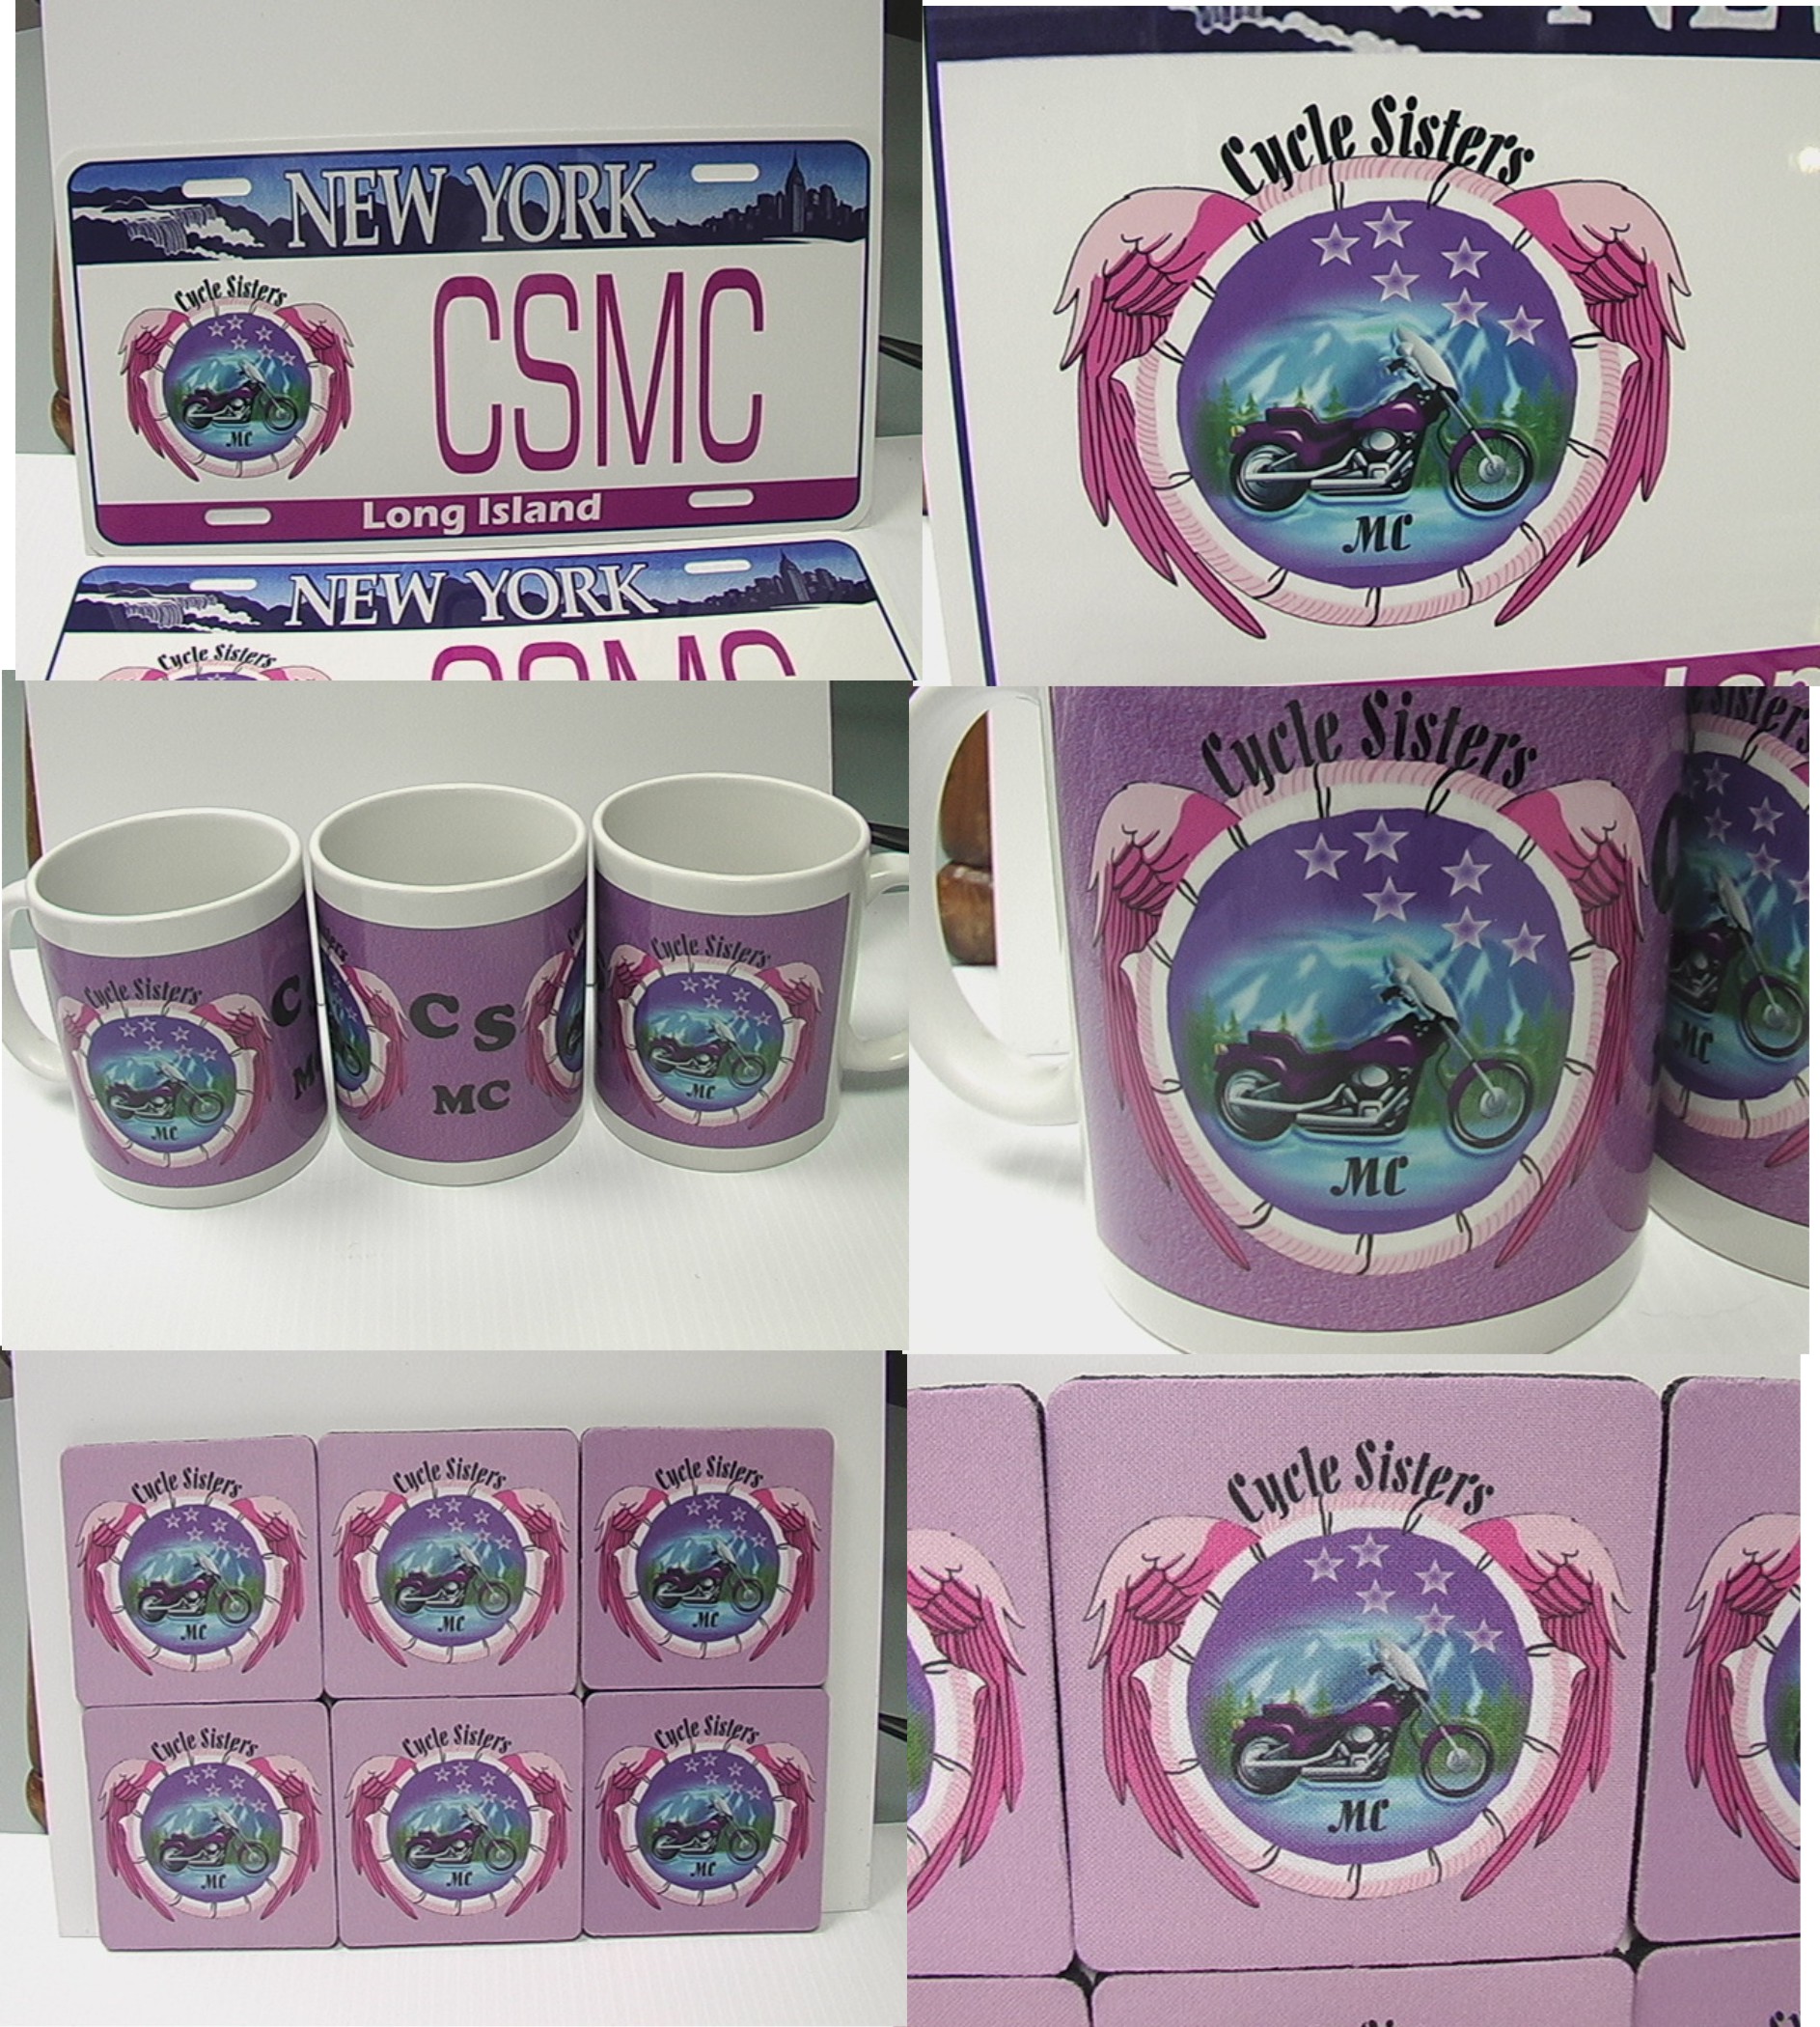 MC Club Items made with sublimation printing